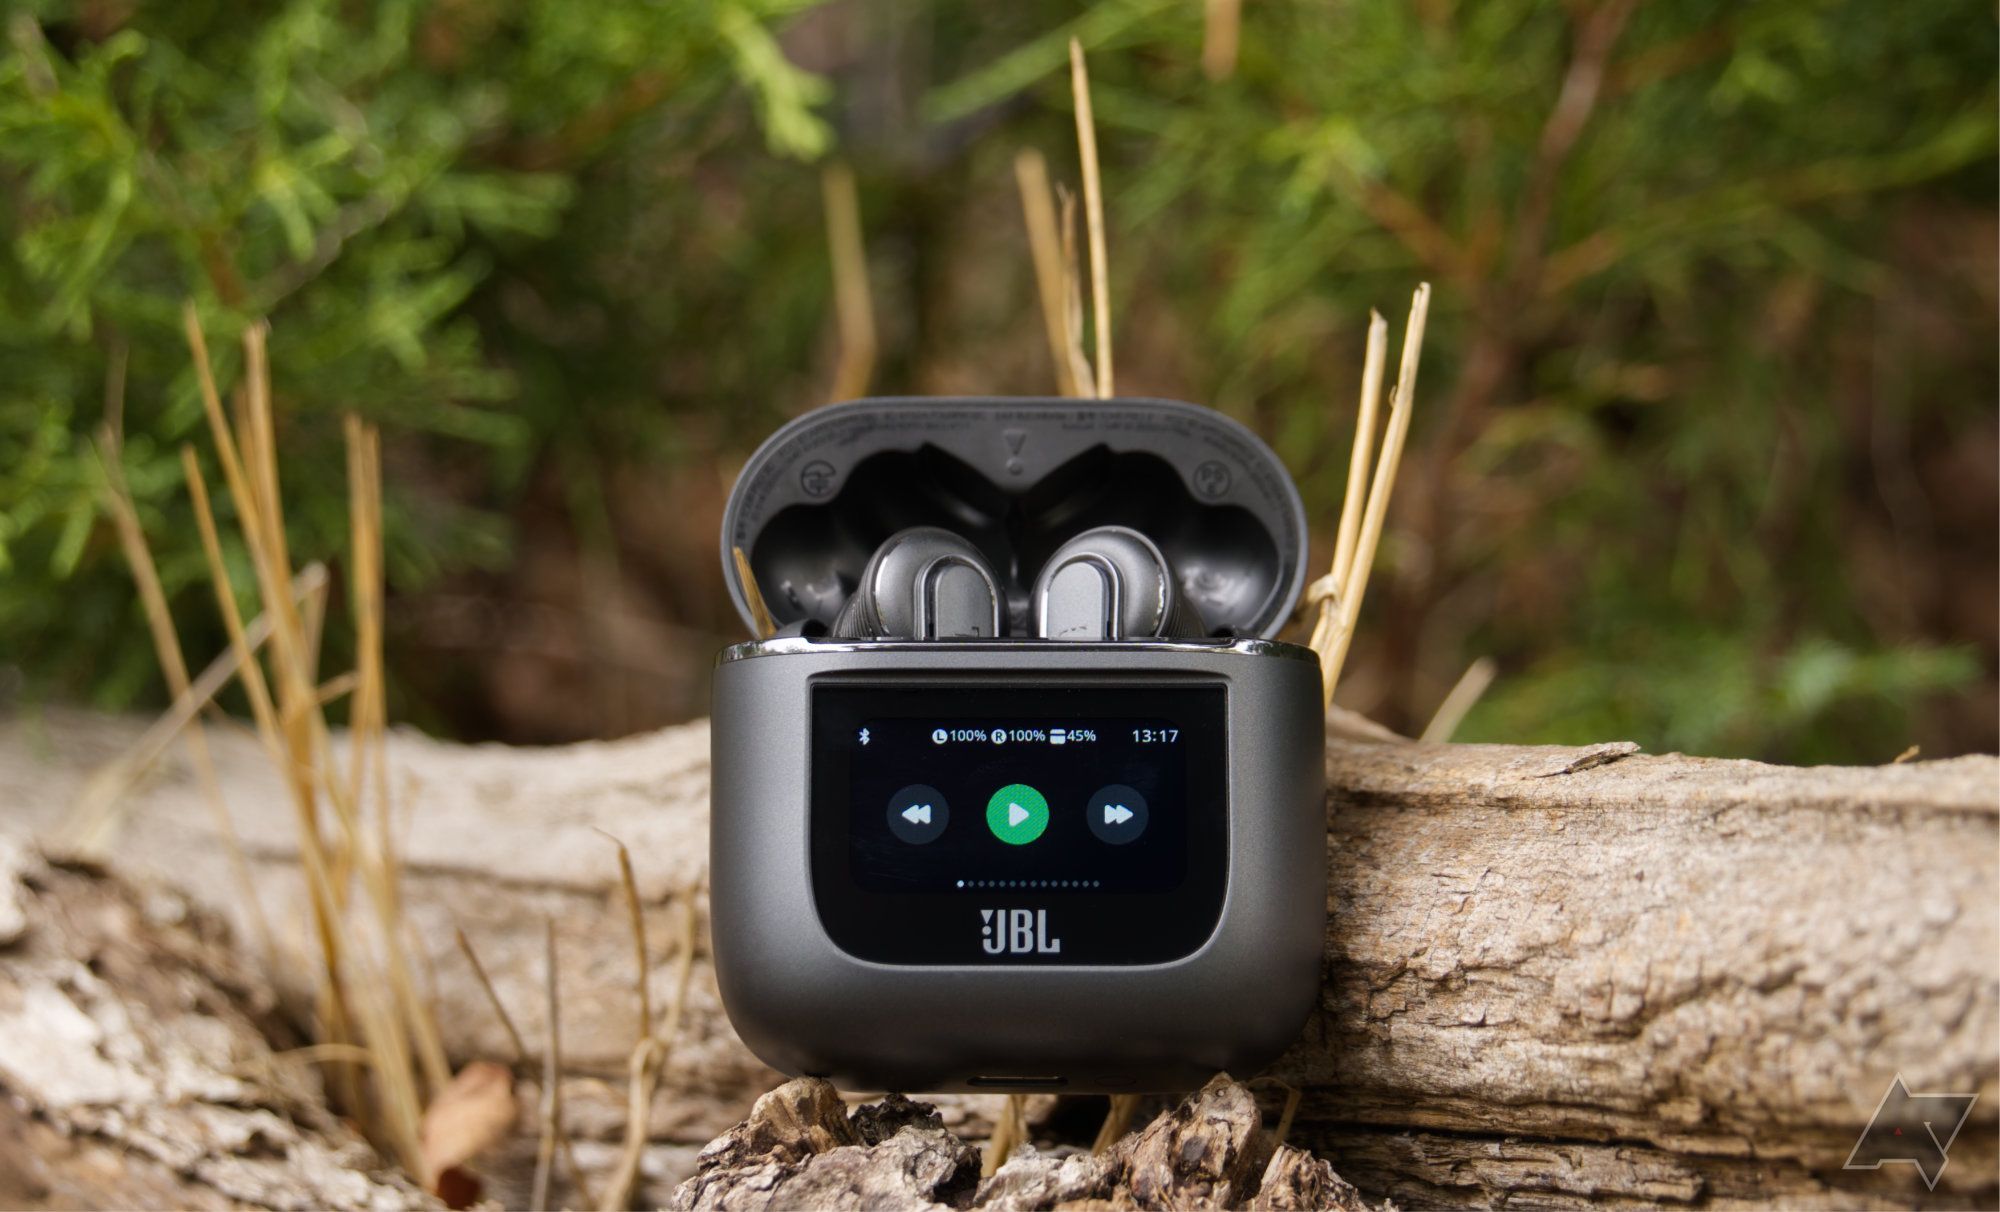 Extra brainy: JBL Tour Pro 2 earbuds boast world's first smart charging case